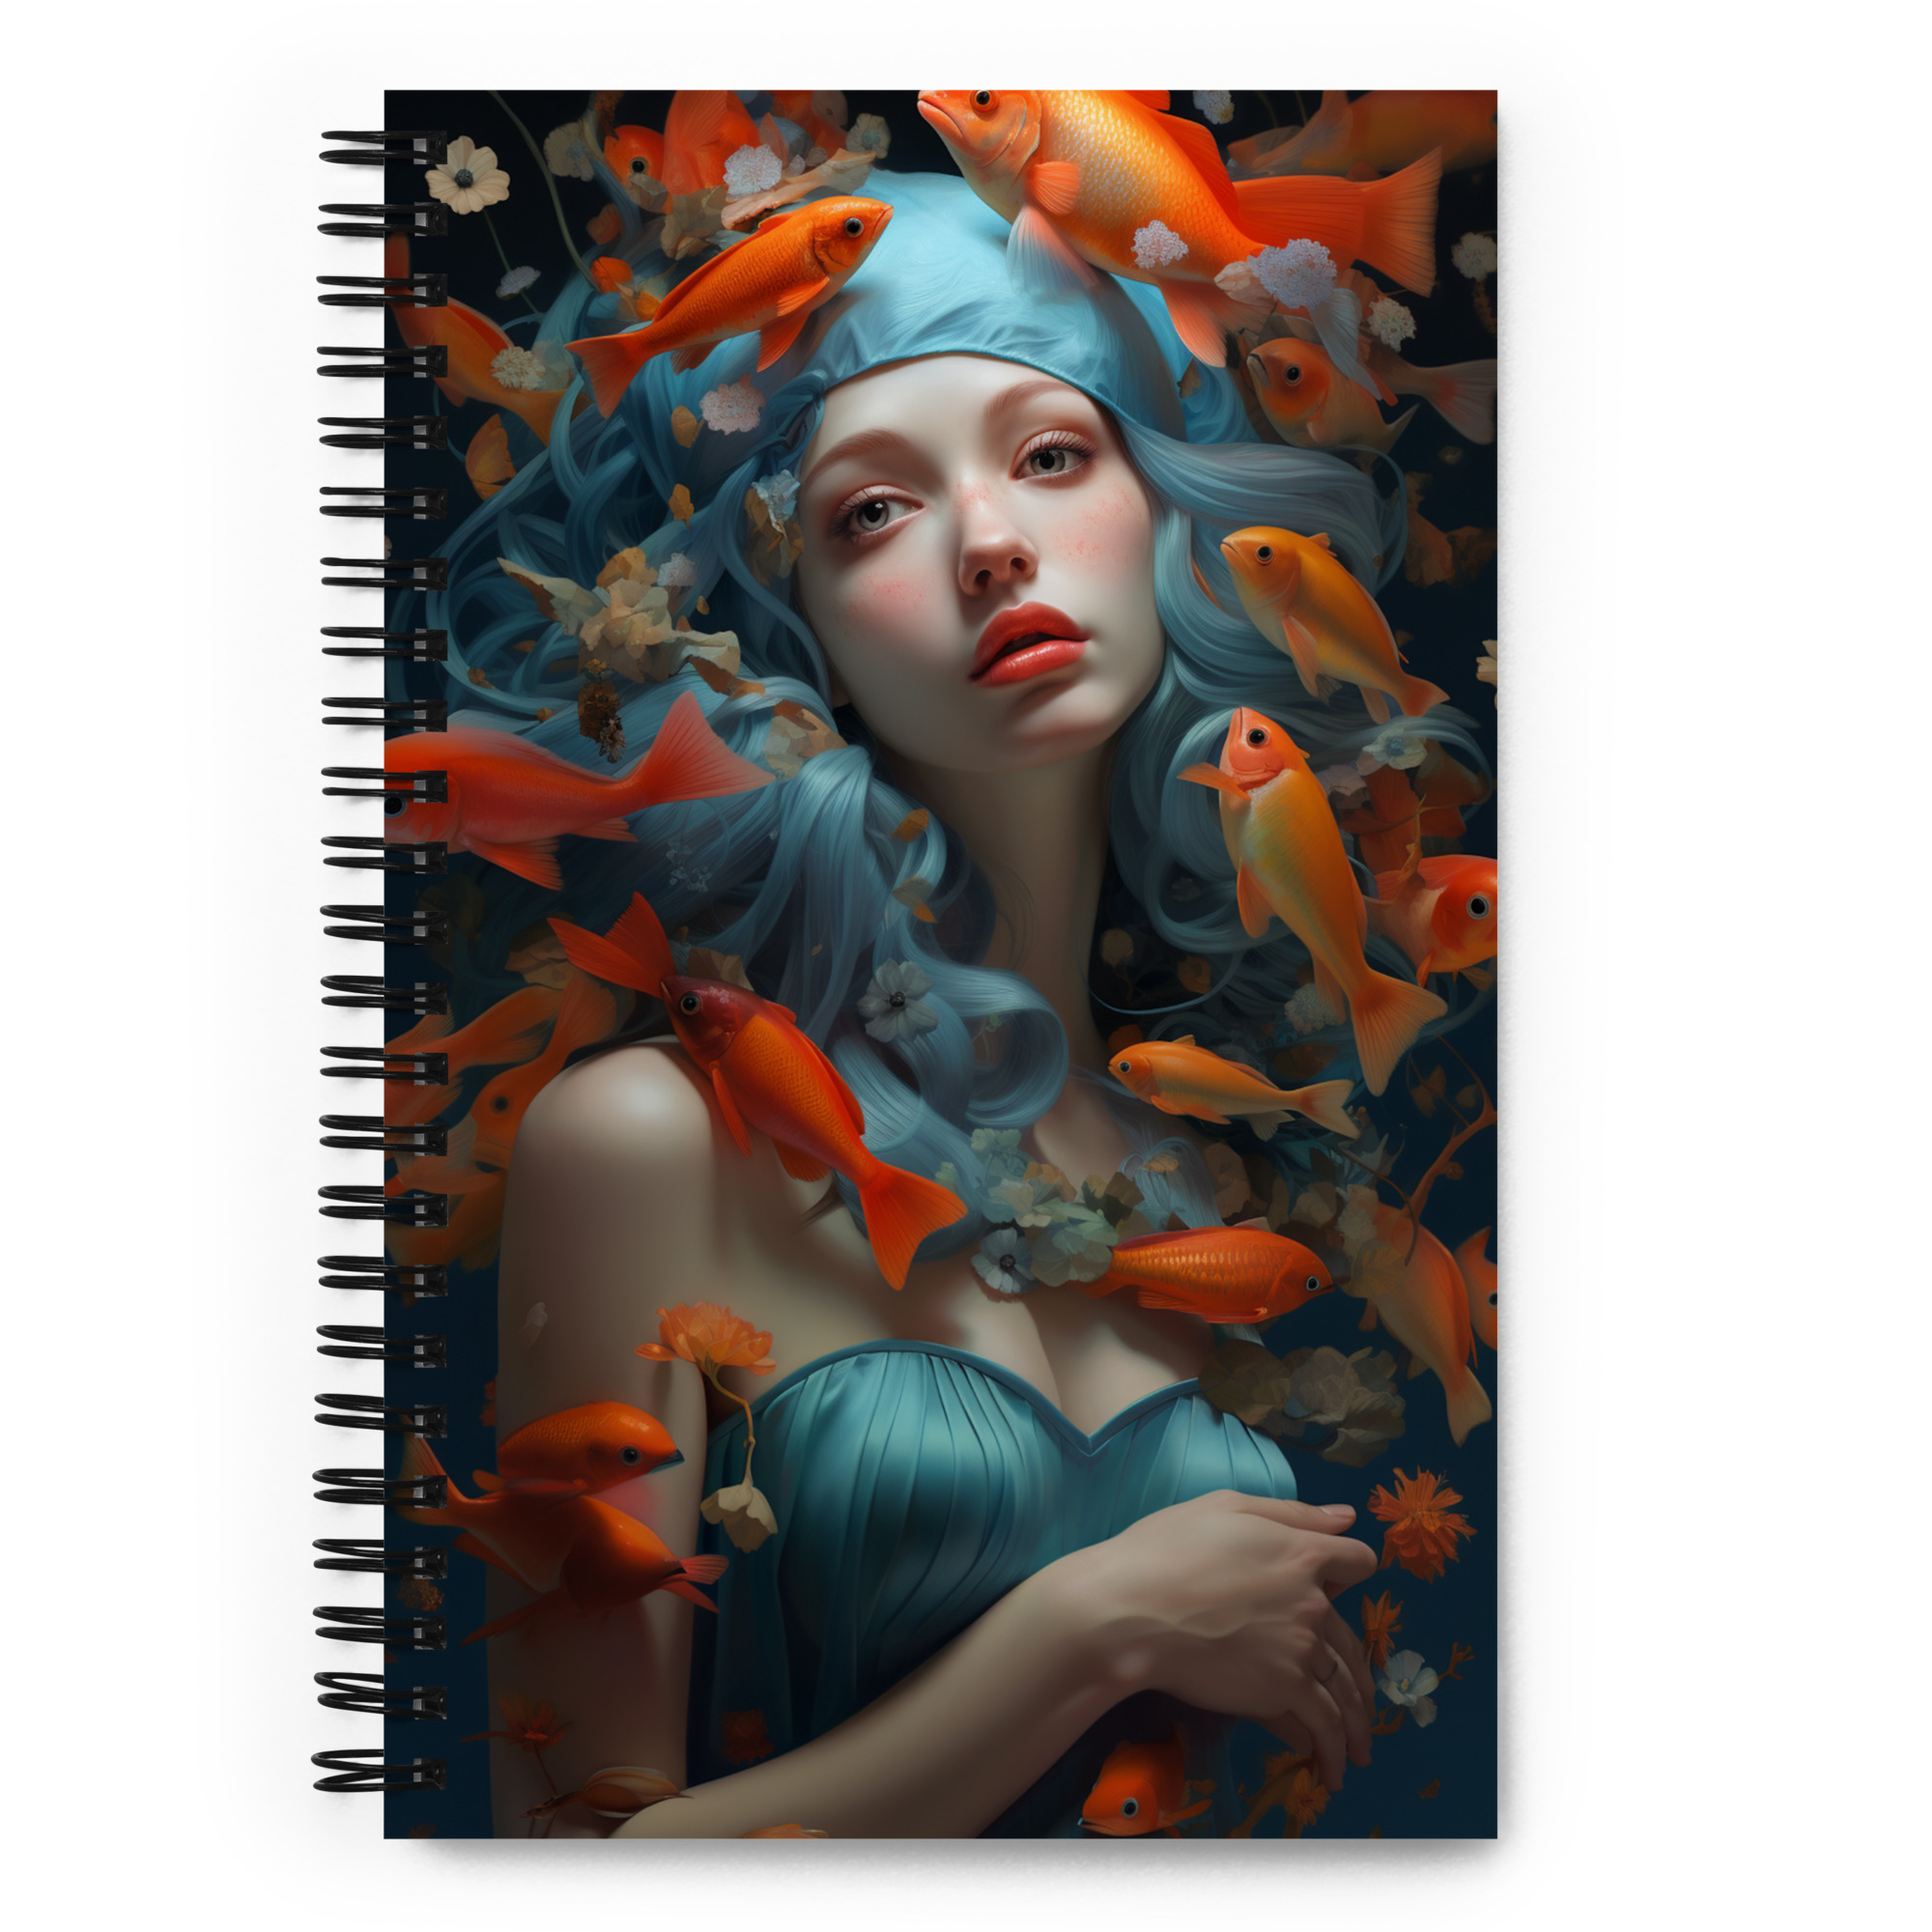 Mother Pisces by Dead Artists, Spiral Notebook, Zodiac Sign, Astrology